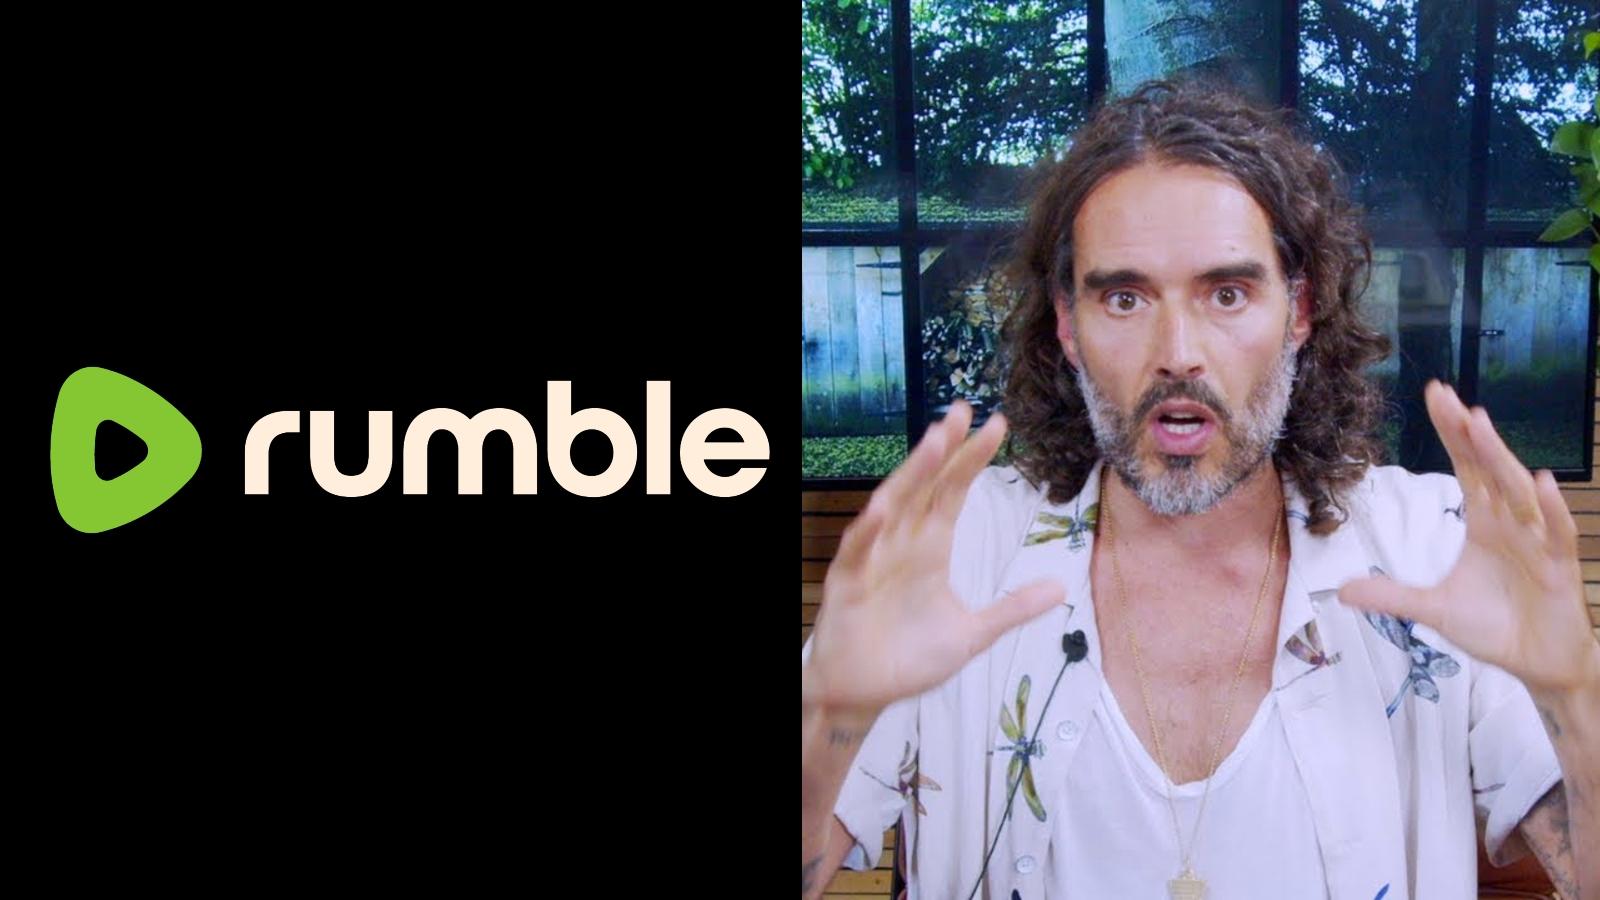 Rumble logo on black background next to picture of Russell Brand